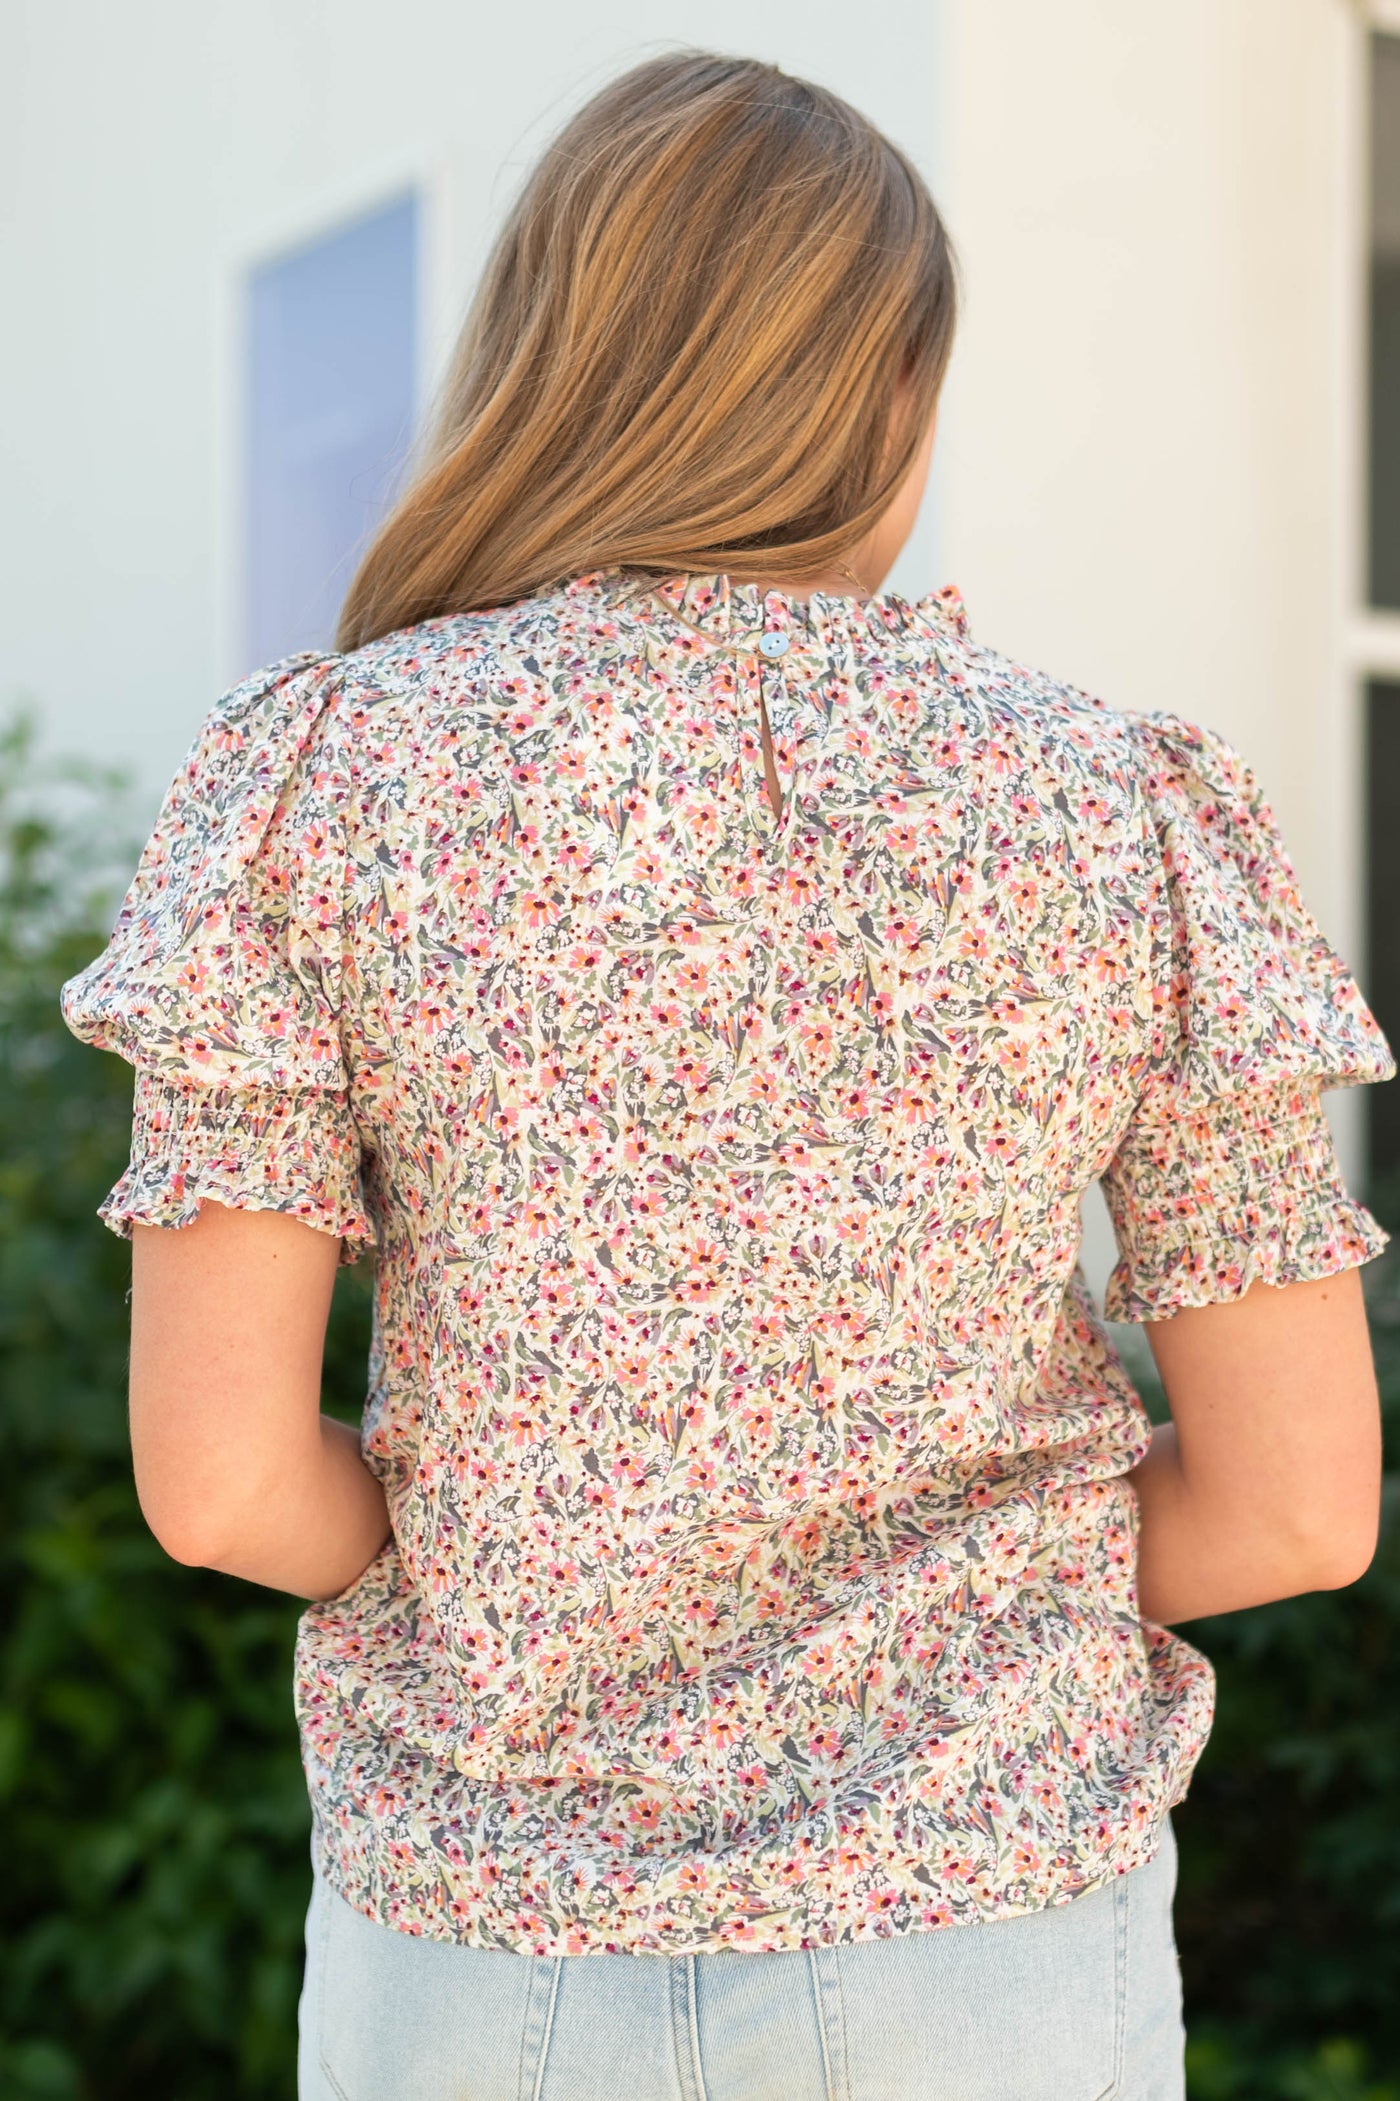 Back view of a pink floral top